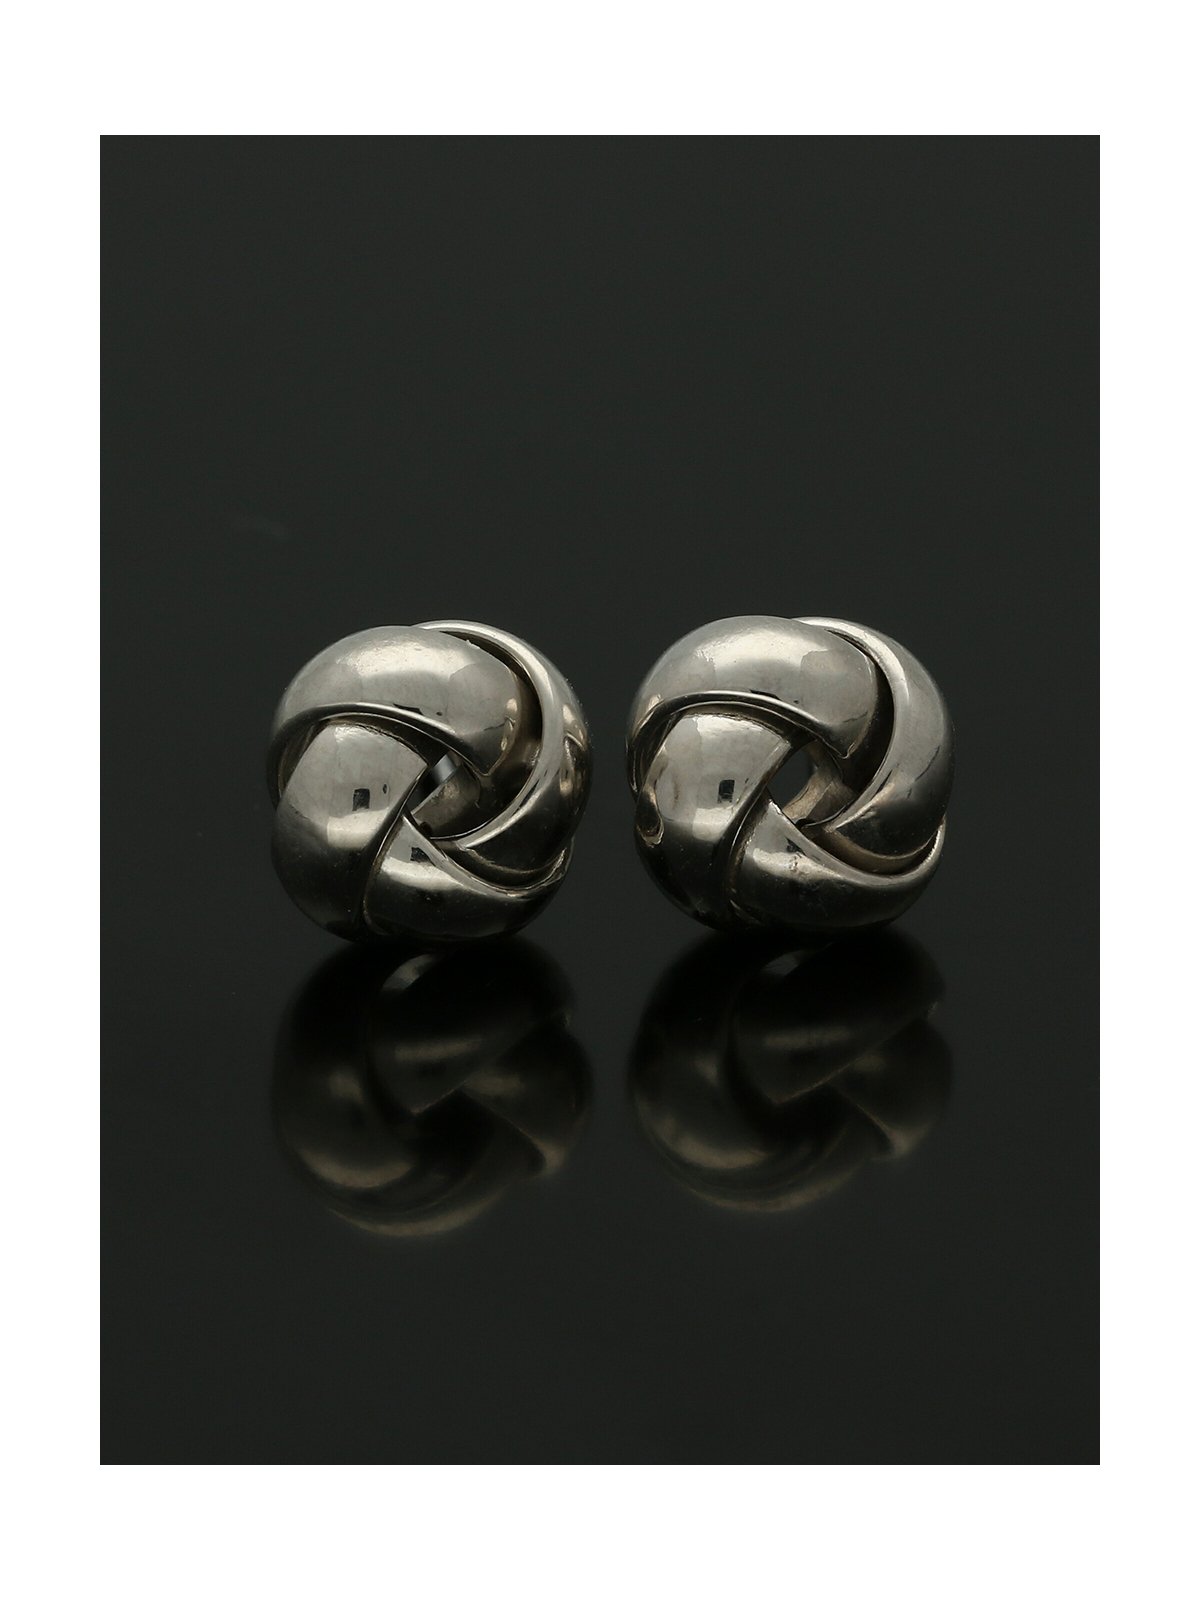 Polished 4 Strand Knot Earrings 8.5mm in 9ct White Gold